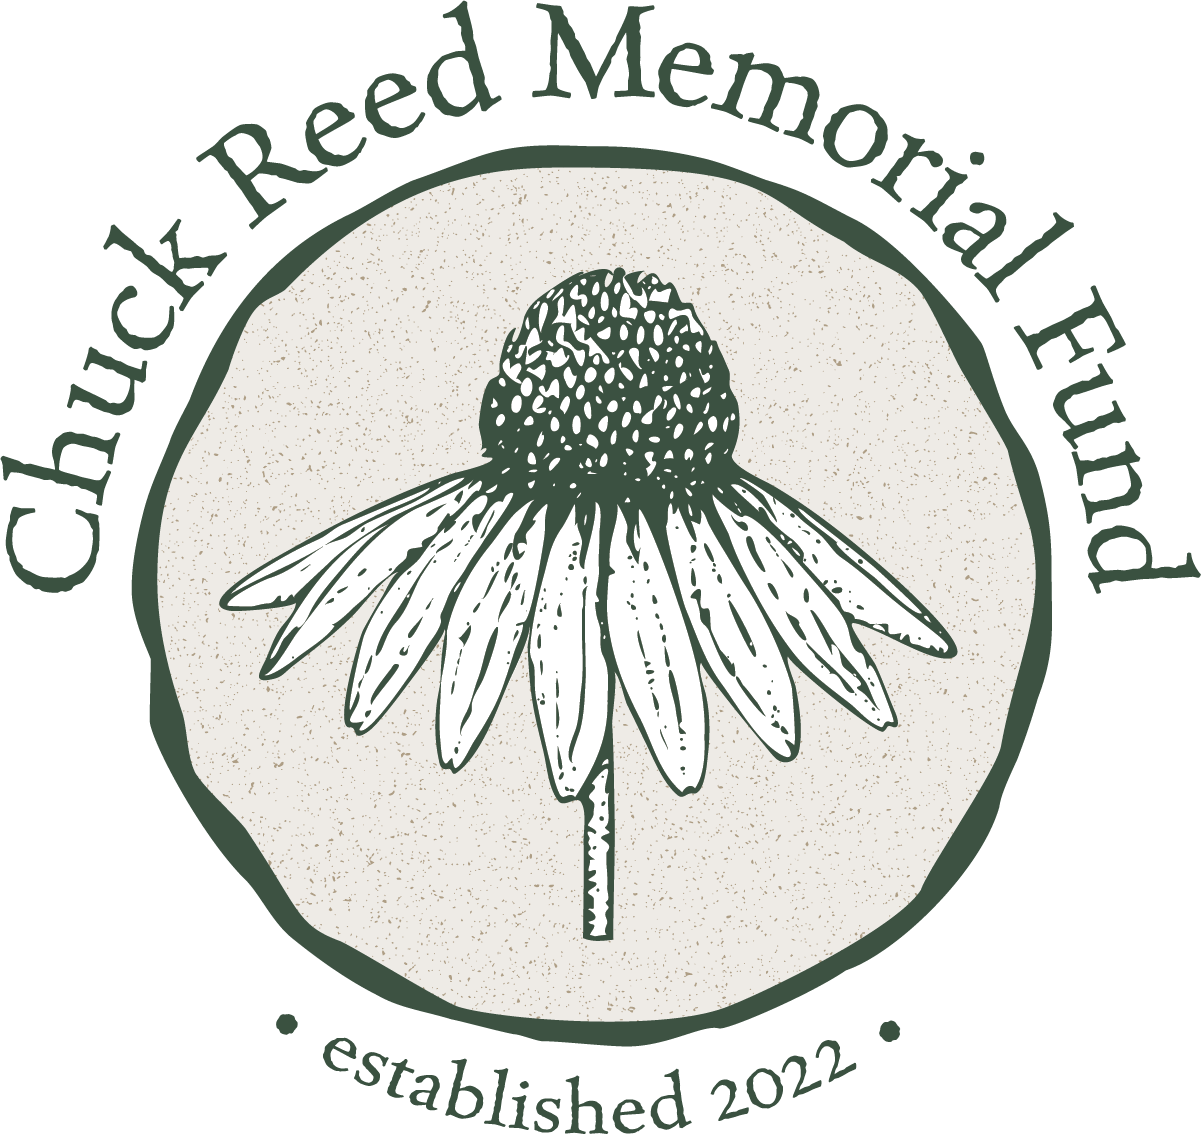 The Chuck Reed Memorial Fund